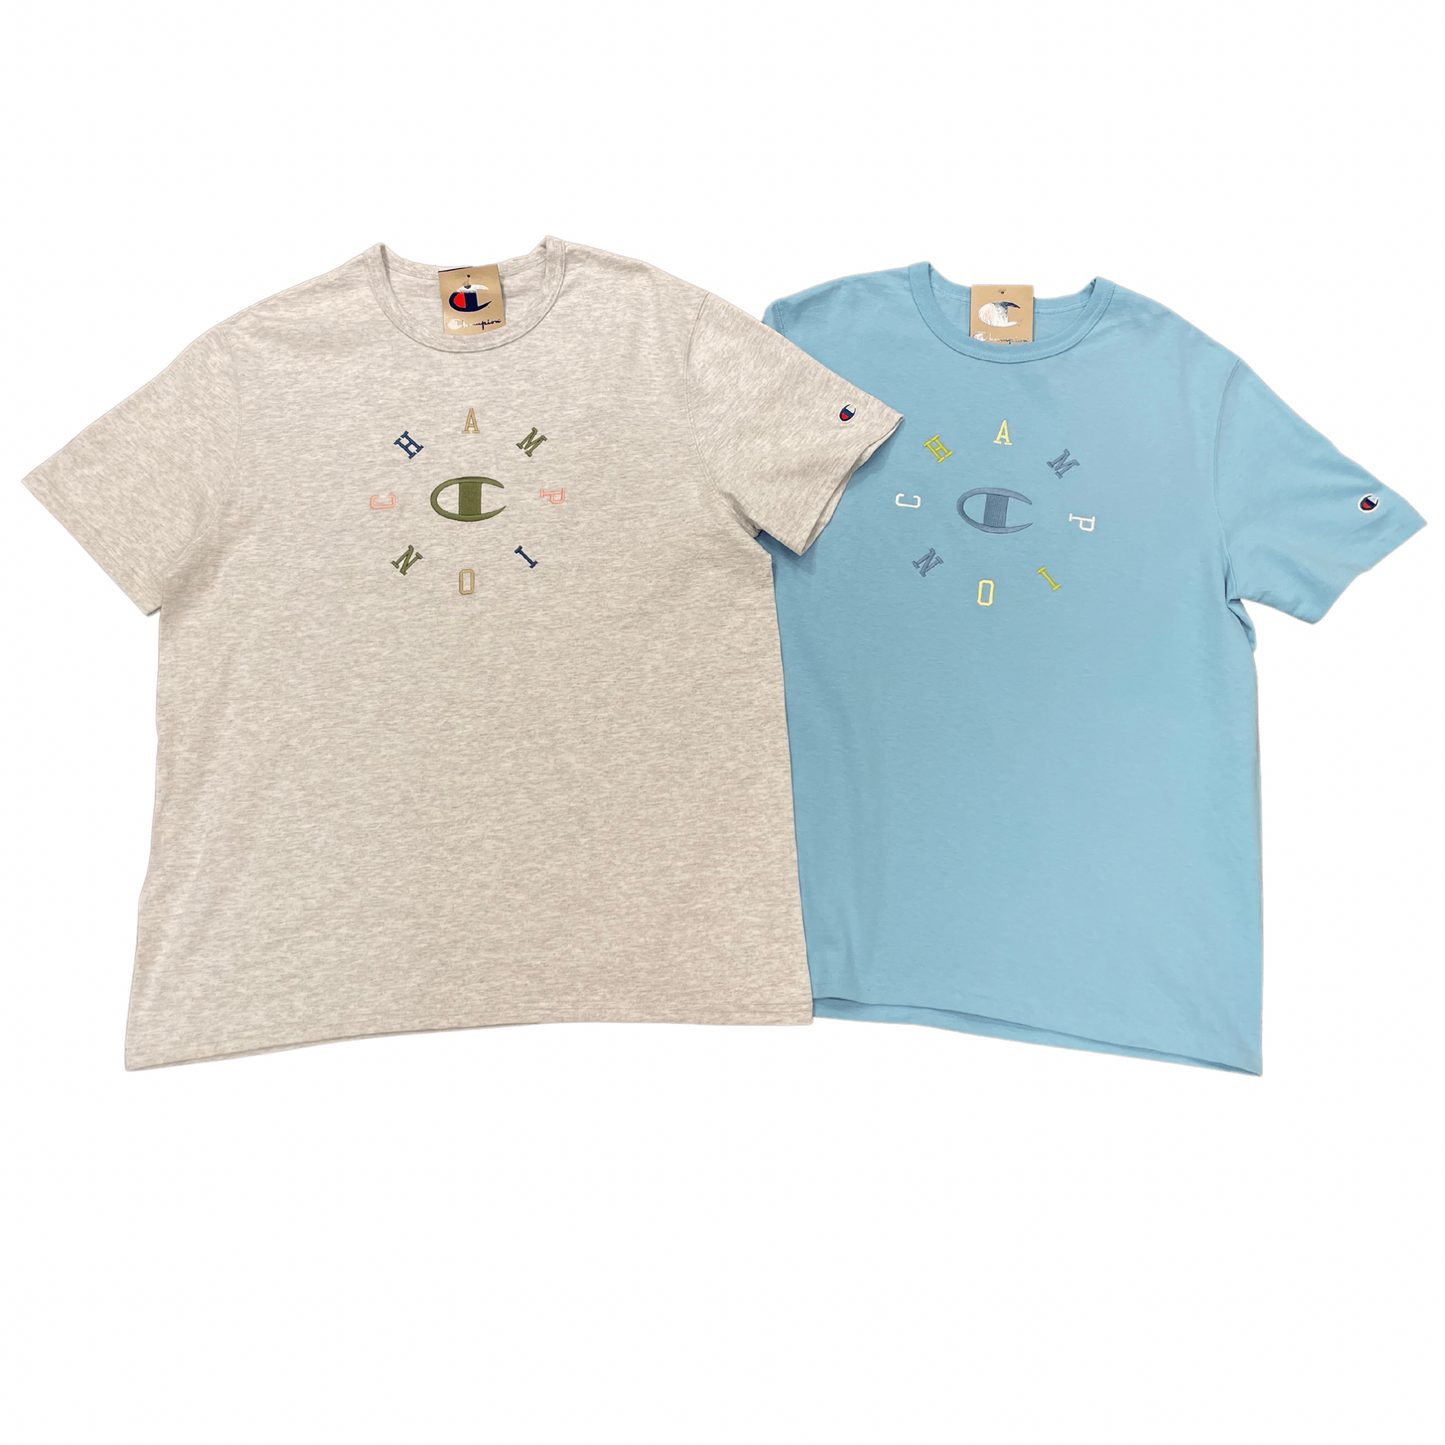 Champion Premium Embroidered Tee (2 Colors S-3XL)